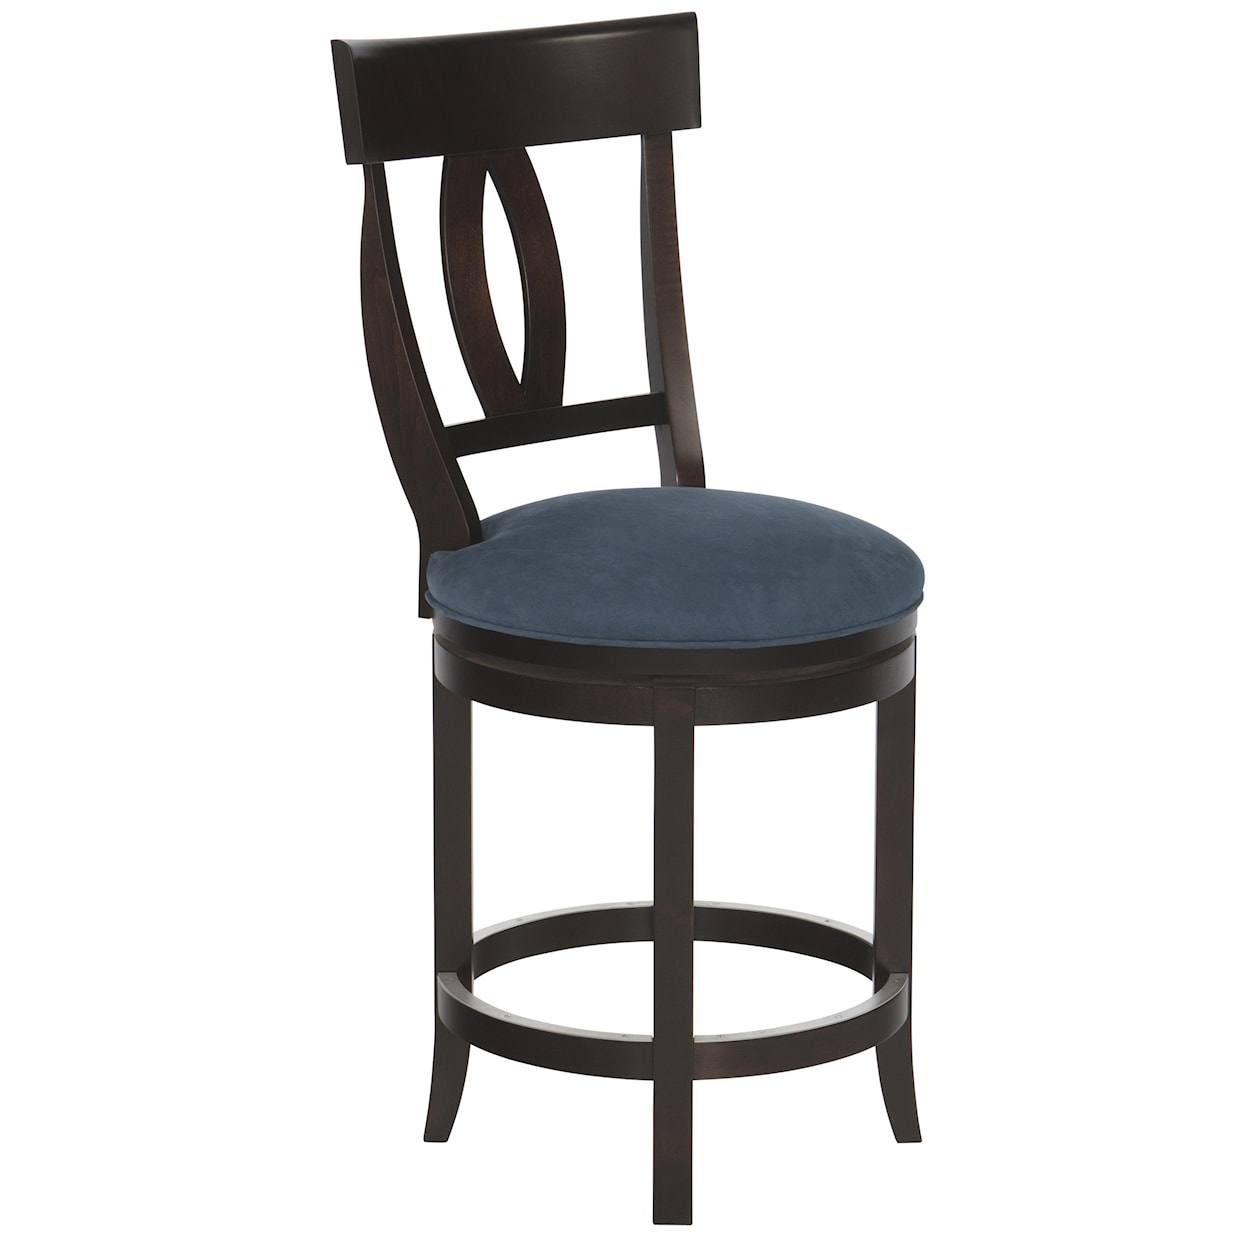 Canadel Canadel Customizable 24" Upholstered Swivel Stool